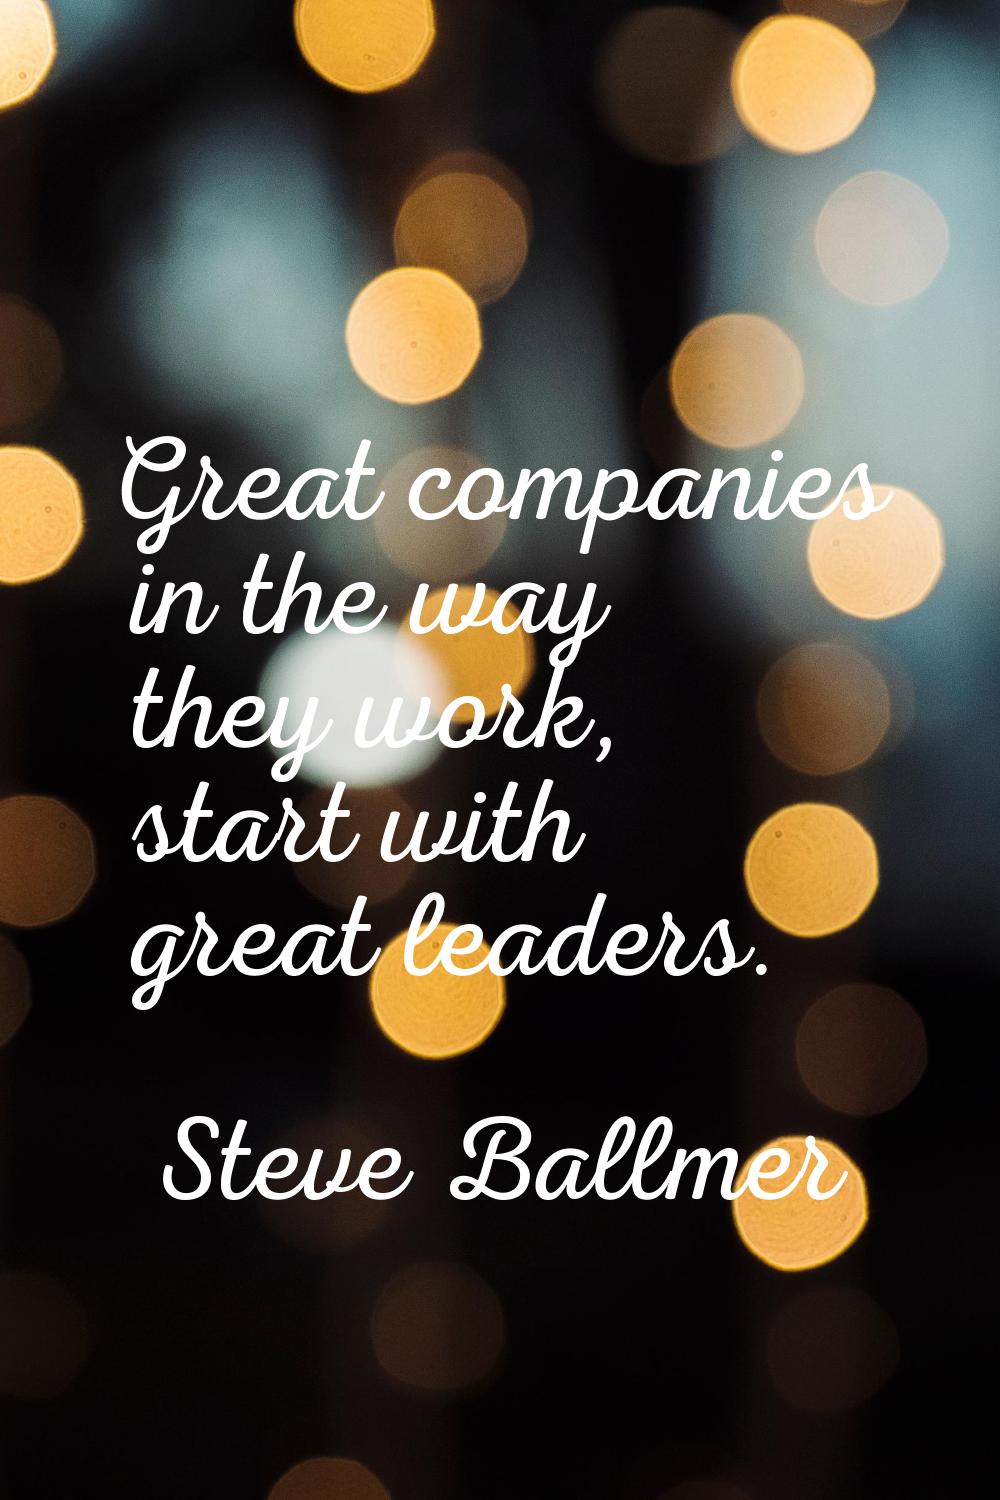 Great companies in the way they work, start with great leaders.